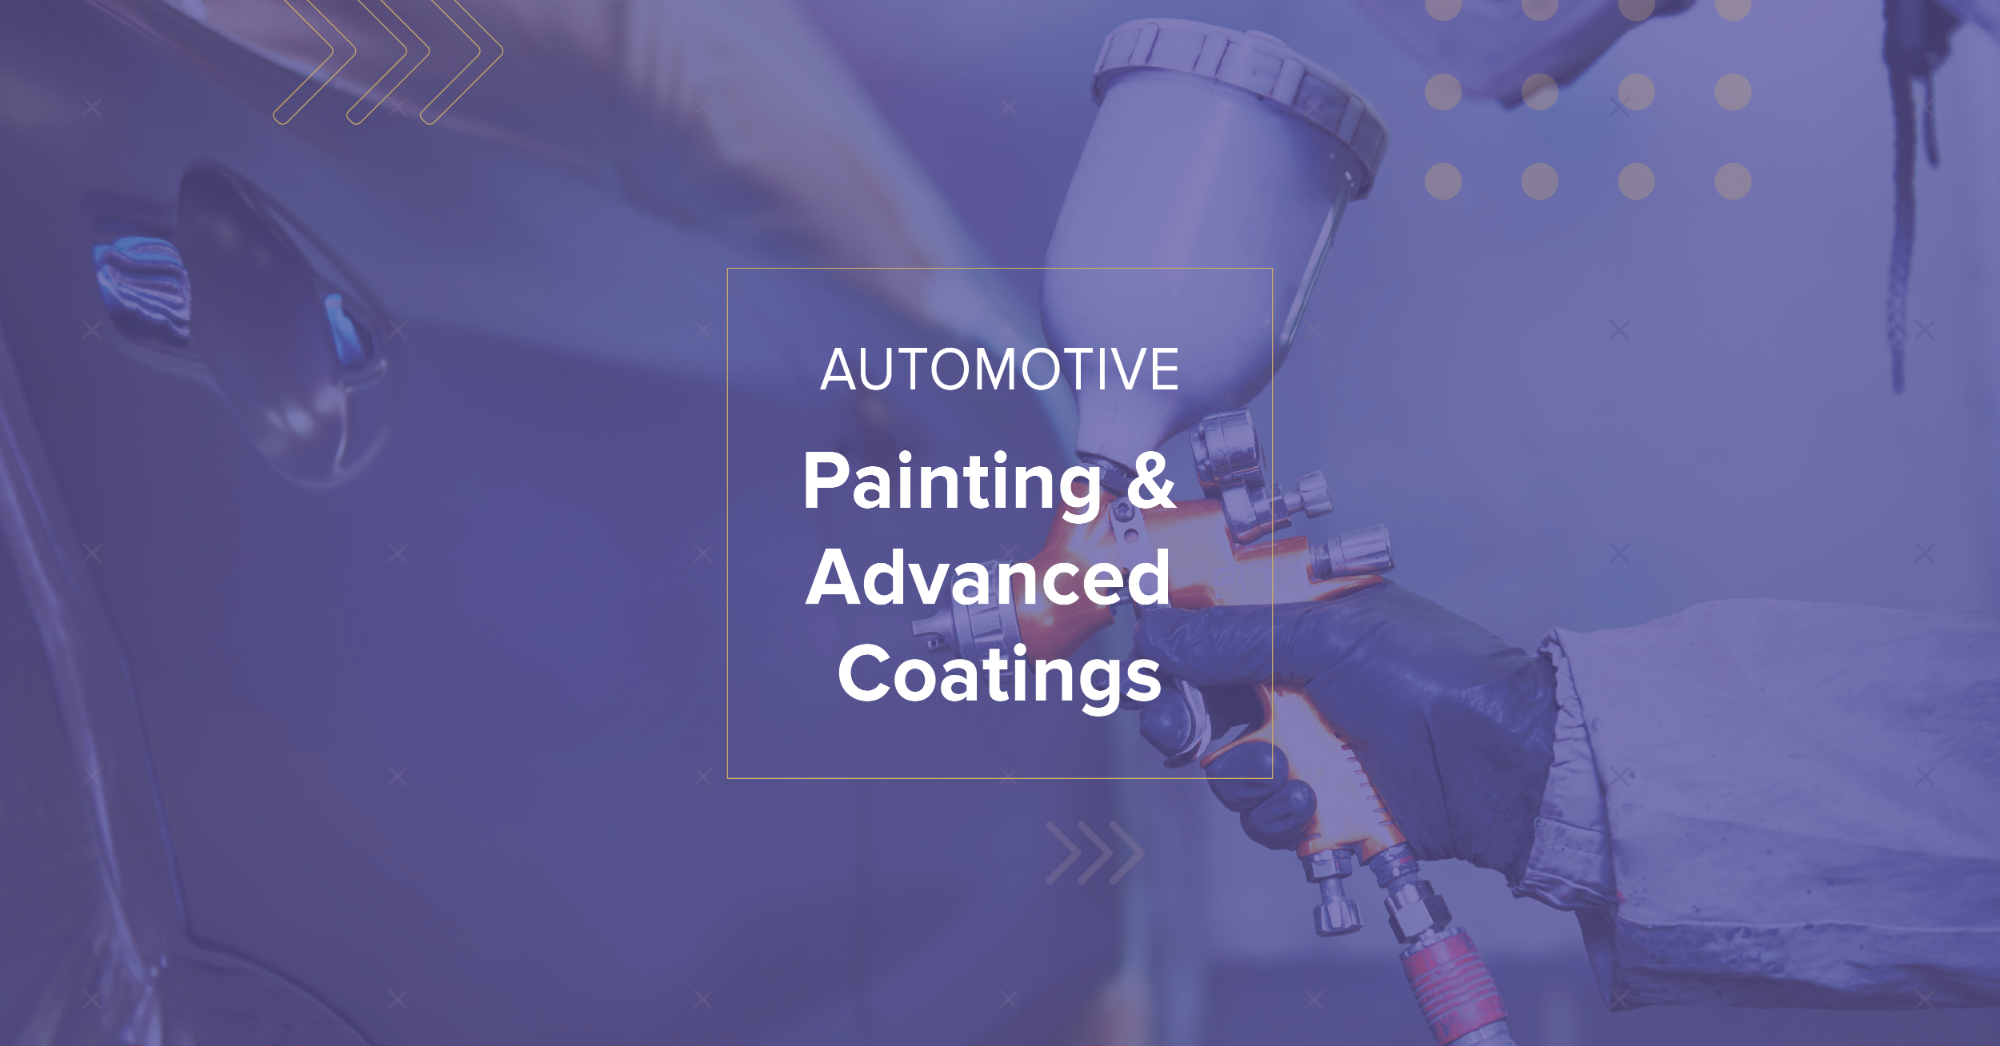 Triple Automotive Events - 3. day - 4th Automotive Painting & Advanced Coatings Summit